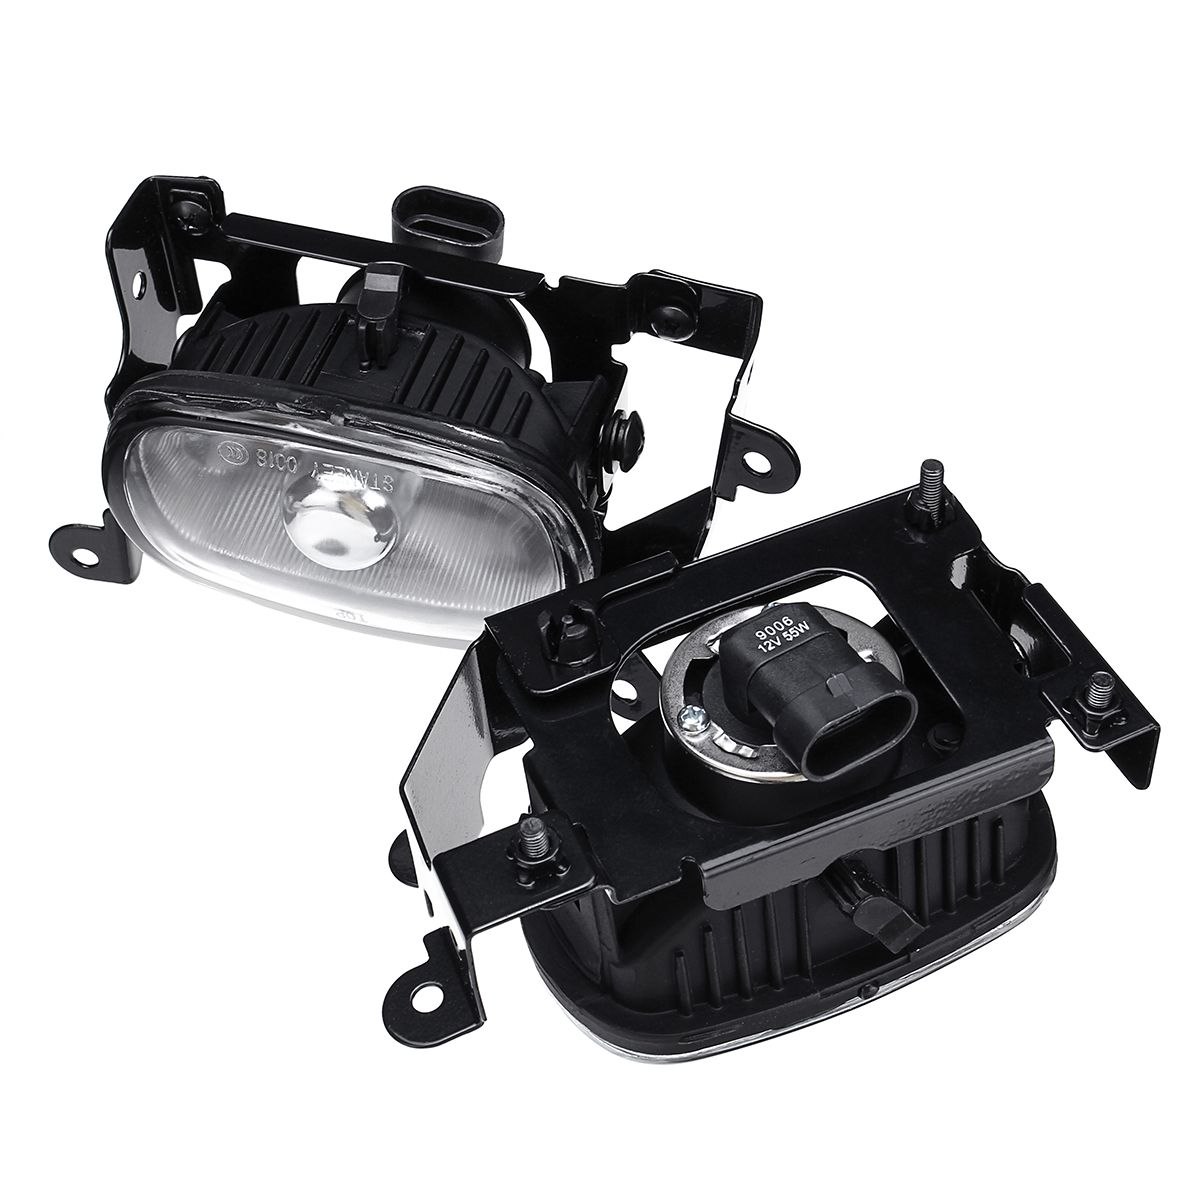 Front-Fog-Lights-Lamp-With-Bulds-Pair-For-Mitsubishi-Outlander-2003-2006-1741602